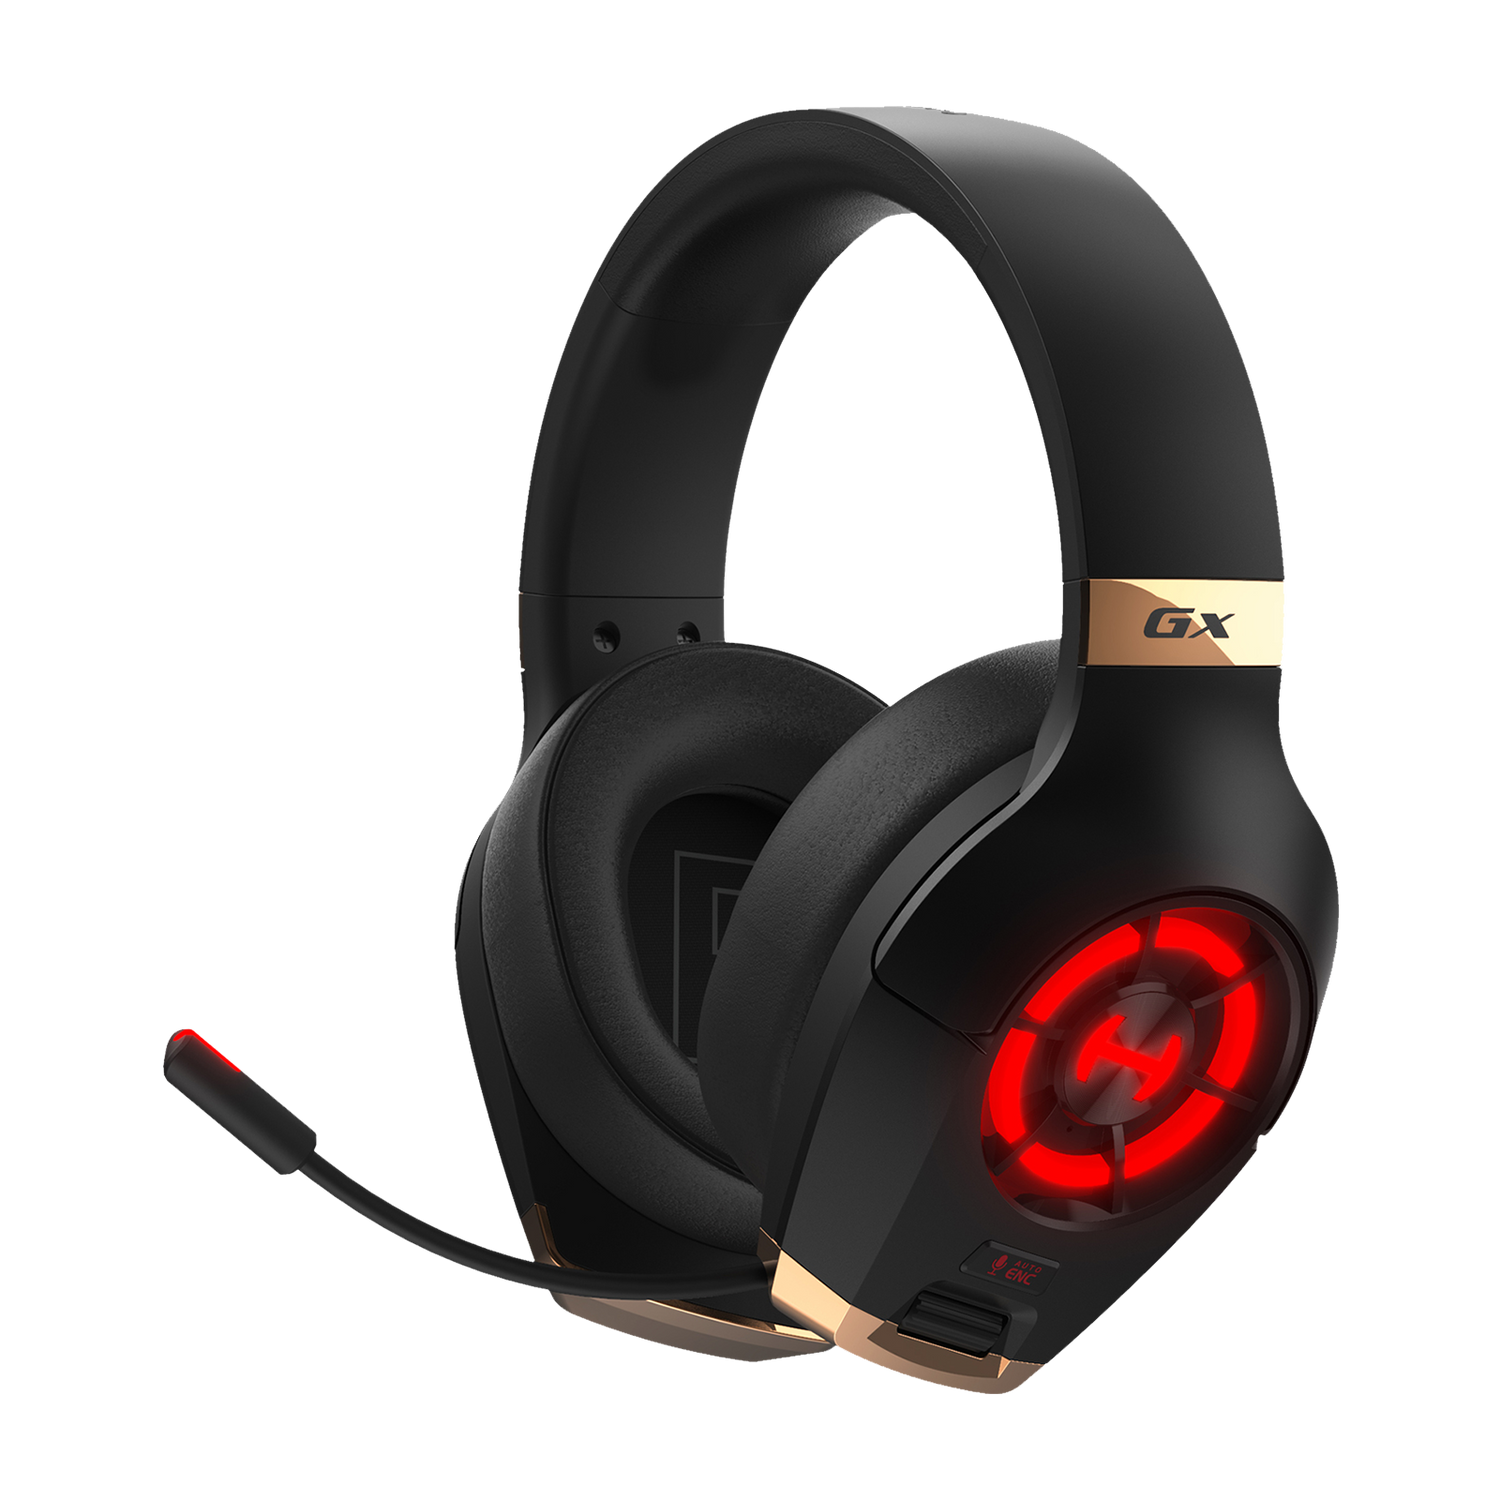 GX Wired Gaming Headphones with Microphone